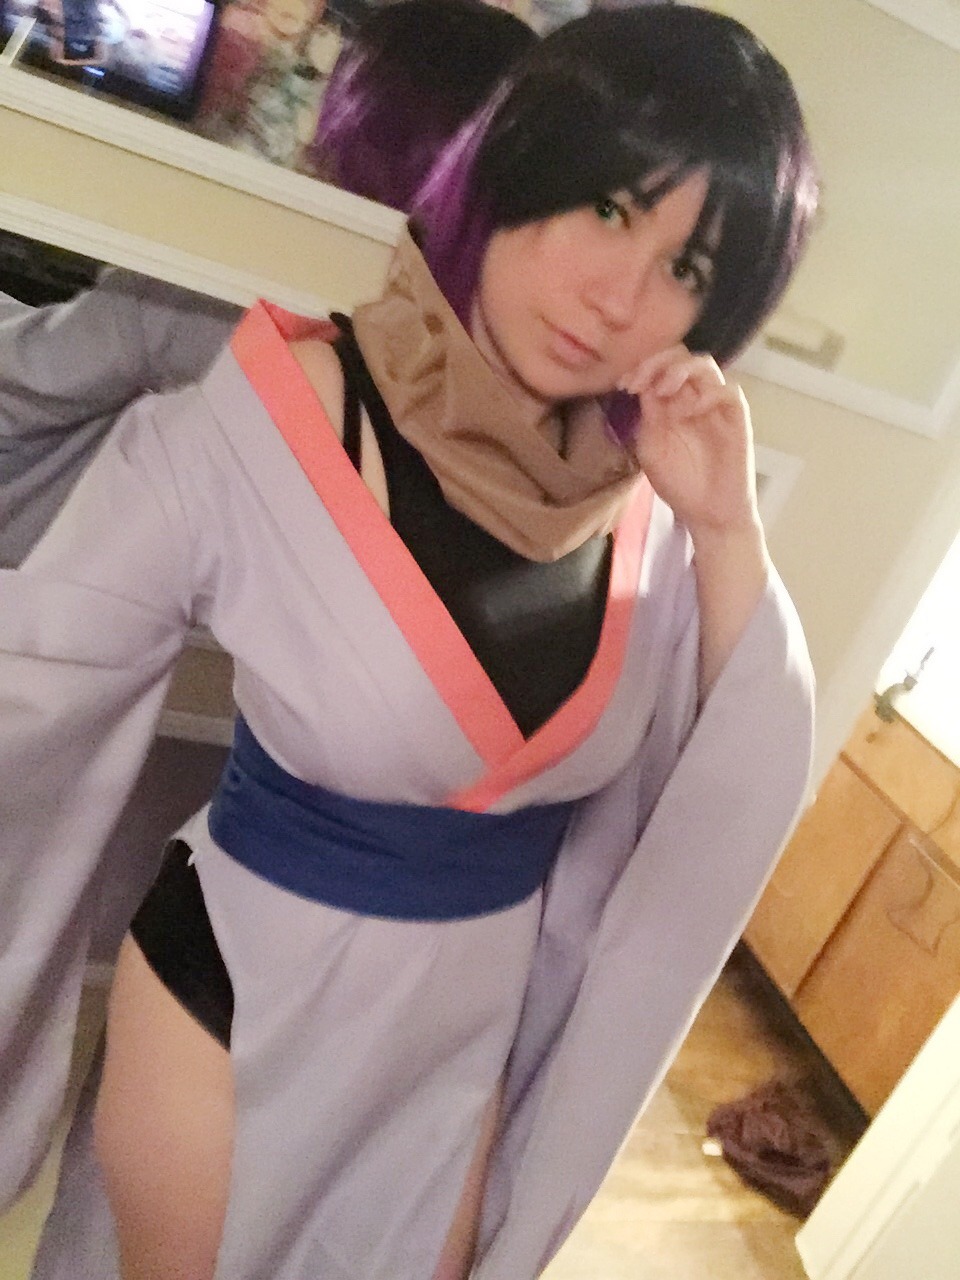 usatame: Thanks to Saber, the sponsor of my Elma cosplay! @rolecosplayshop keeps